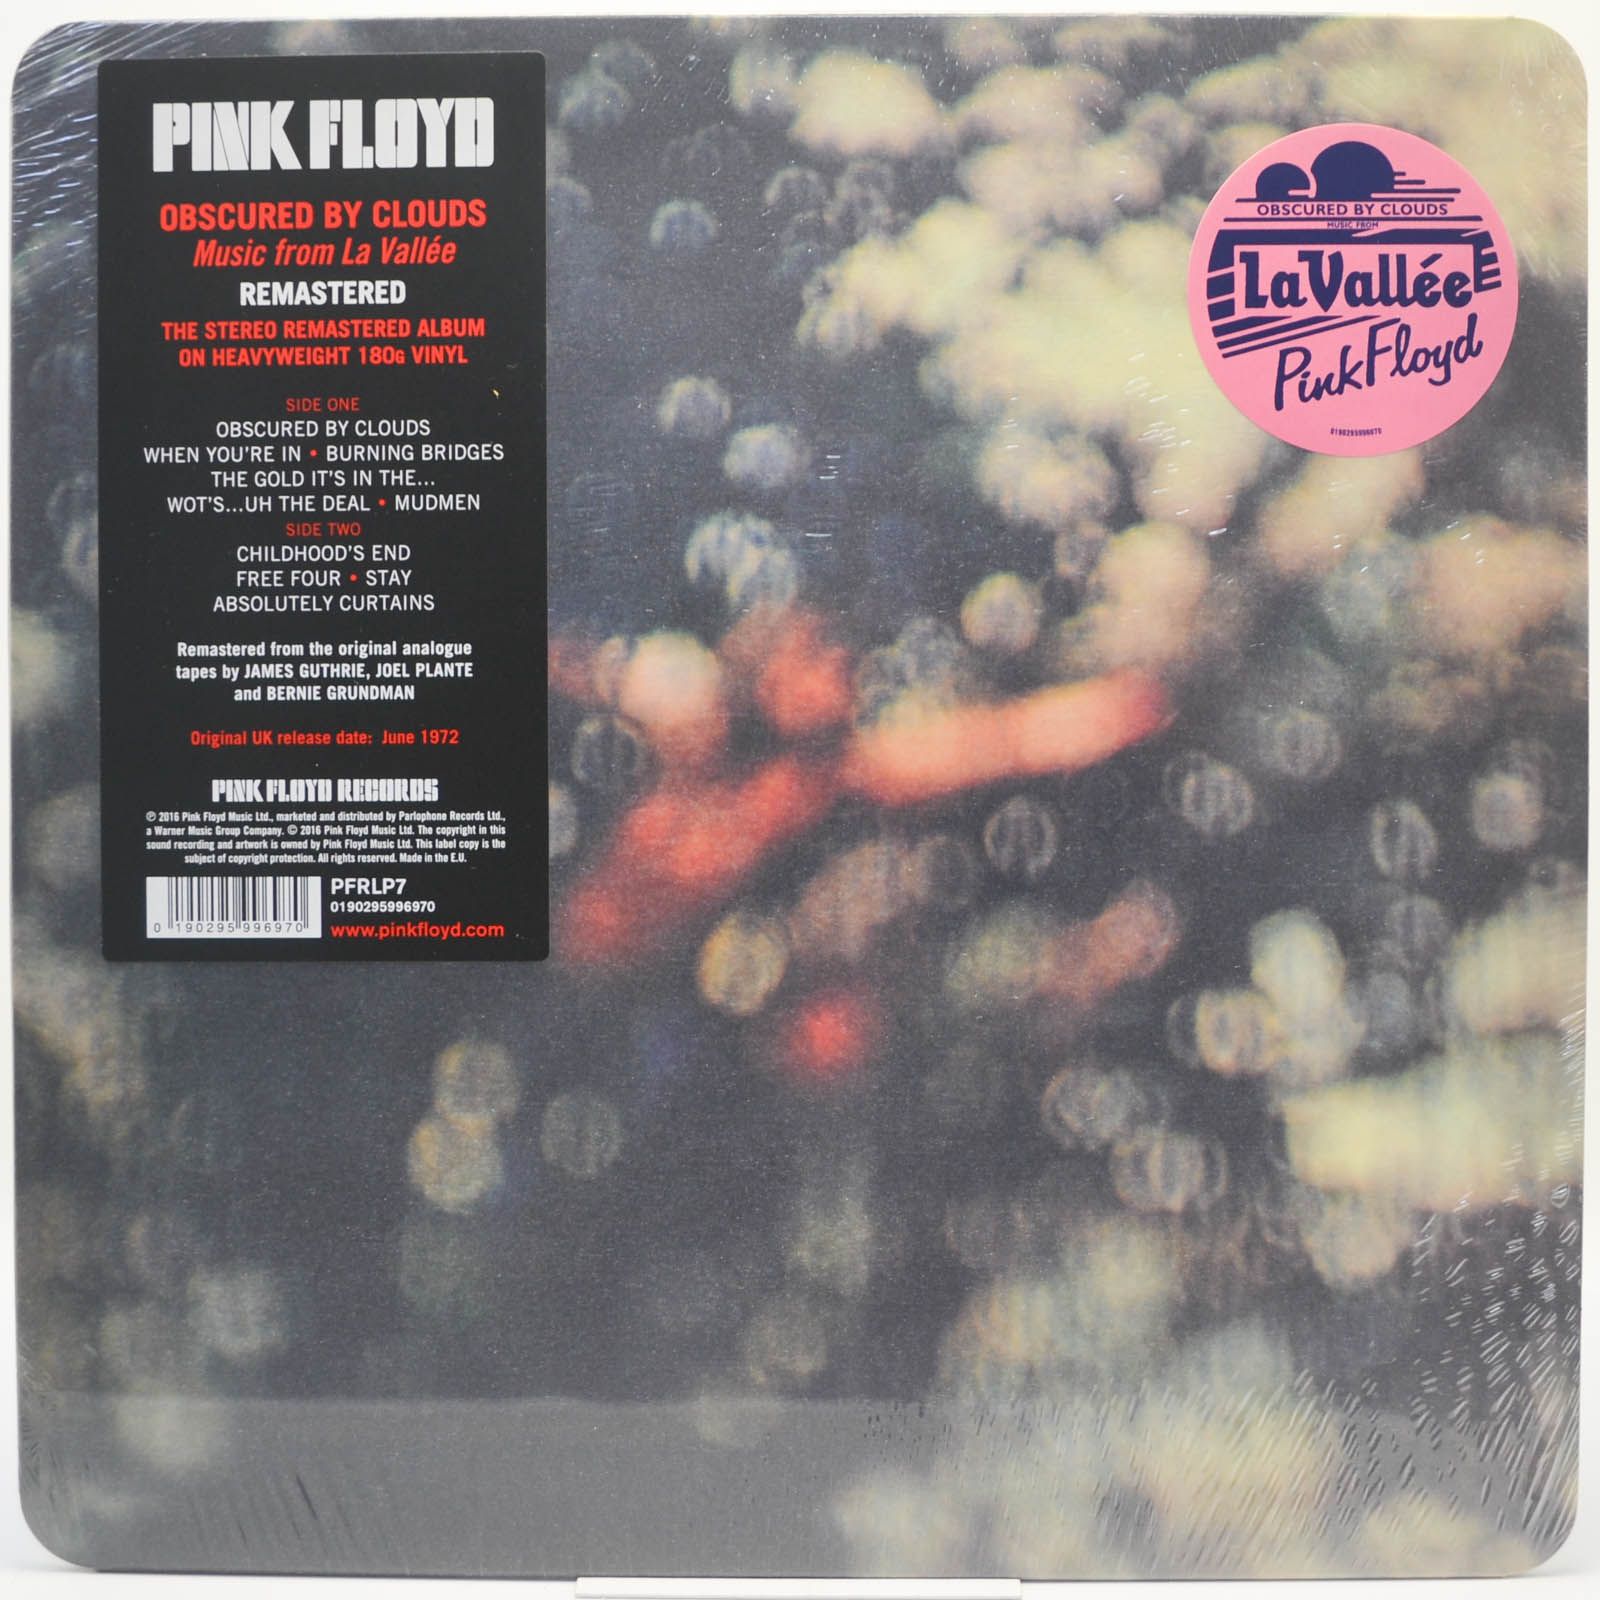 Pink Floyd — Obscured By Clouds (Music From La Vallée), 1972